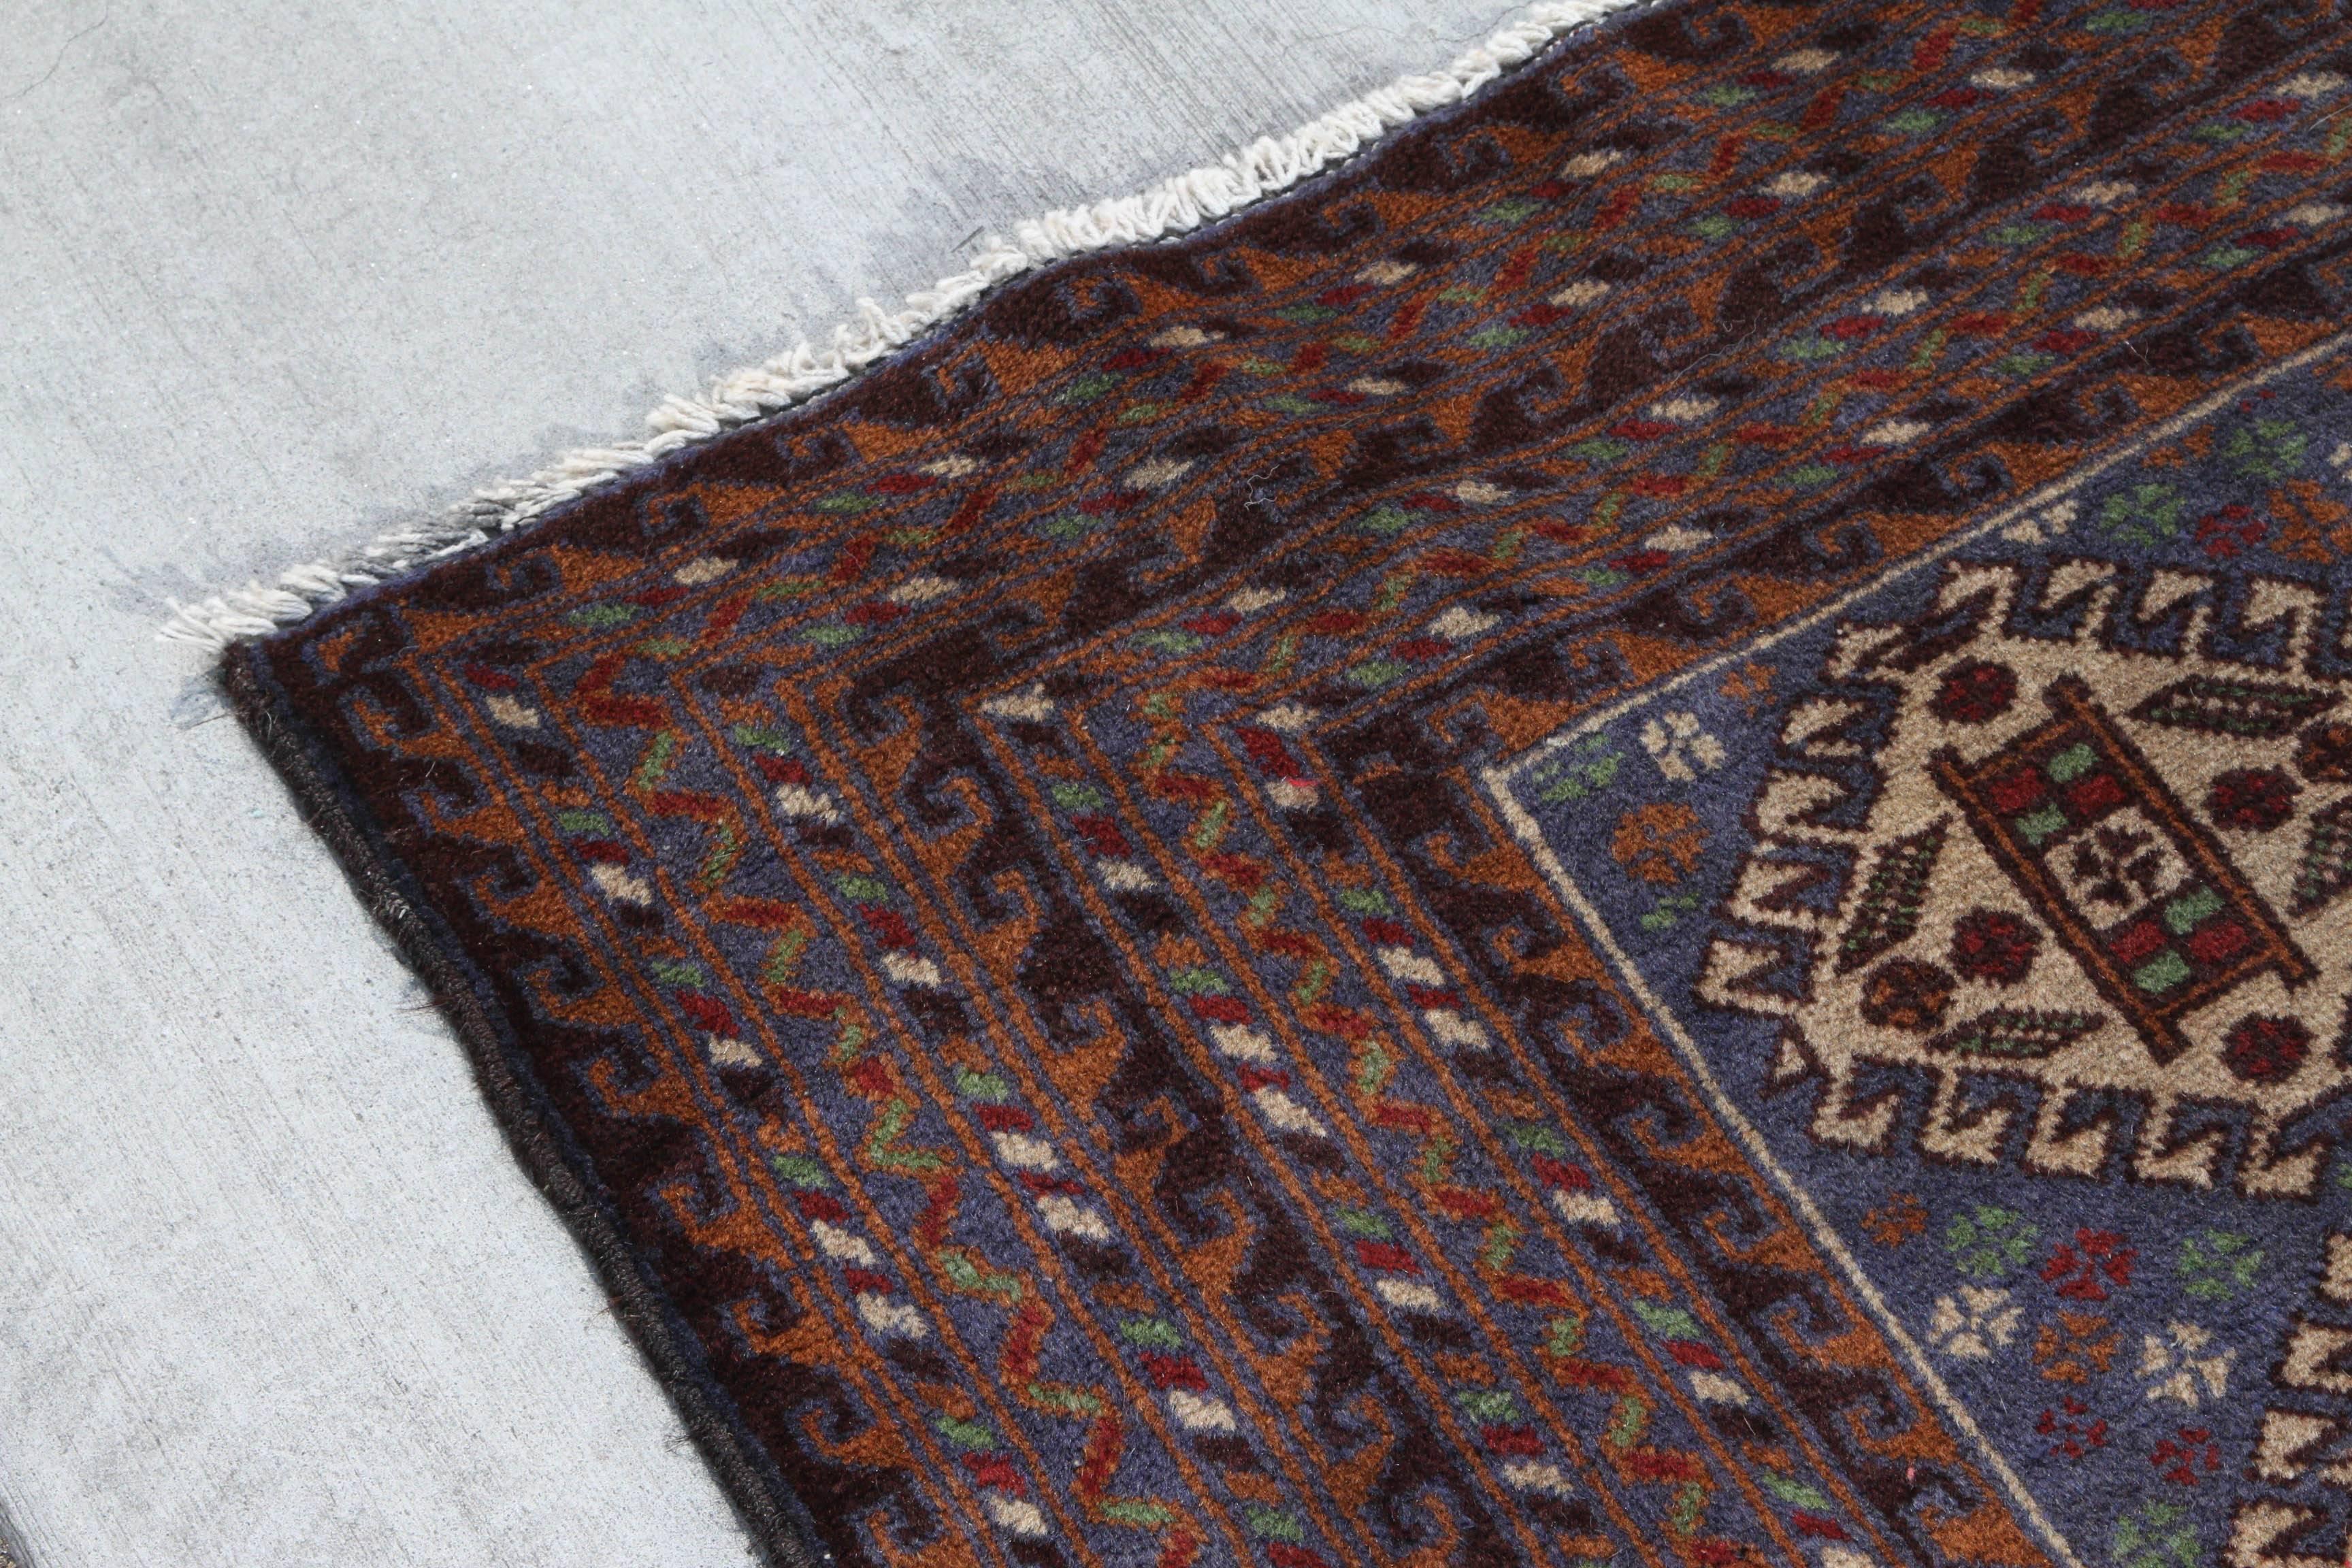 Multicolored Antique Persian Baluchi Rug In Excellent Condition For Sale In South Pasadena, CA